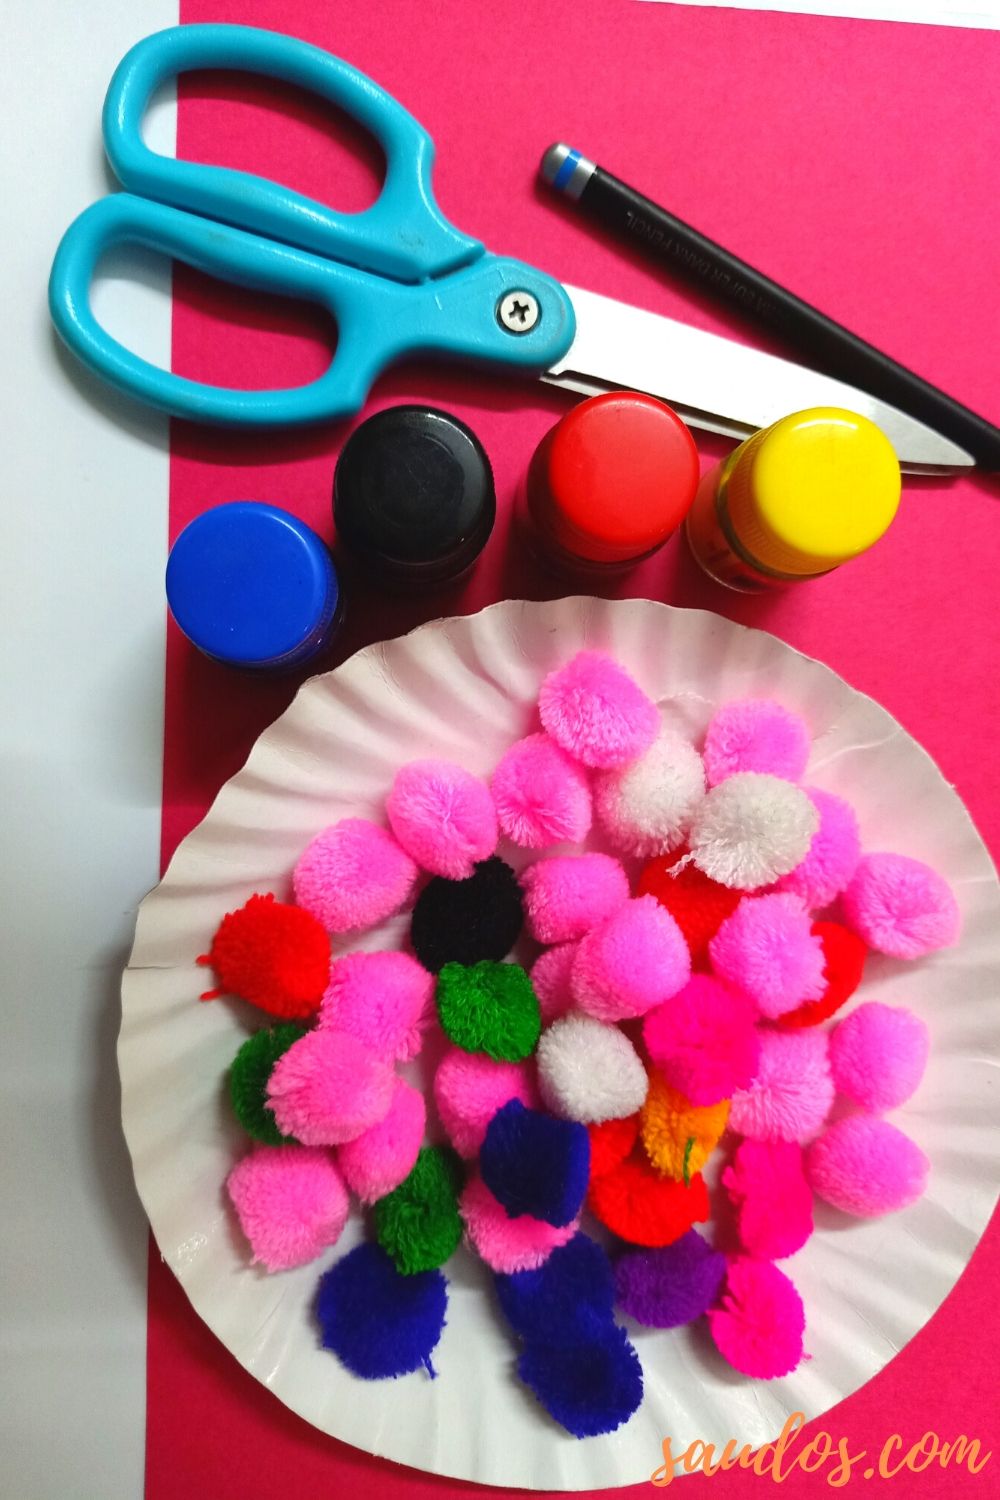 Supplies needed to make Easter eggs using pompoms